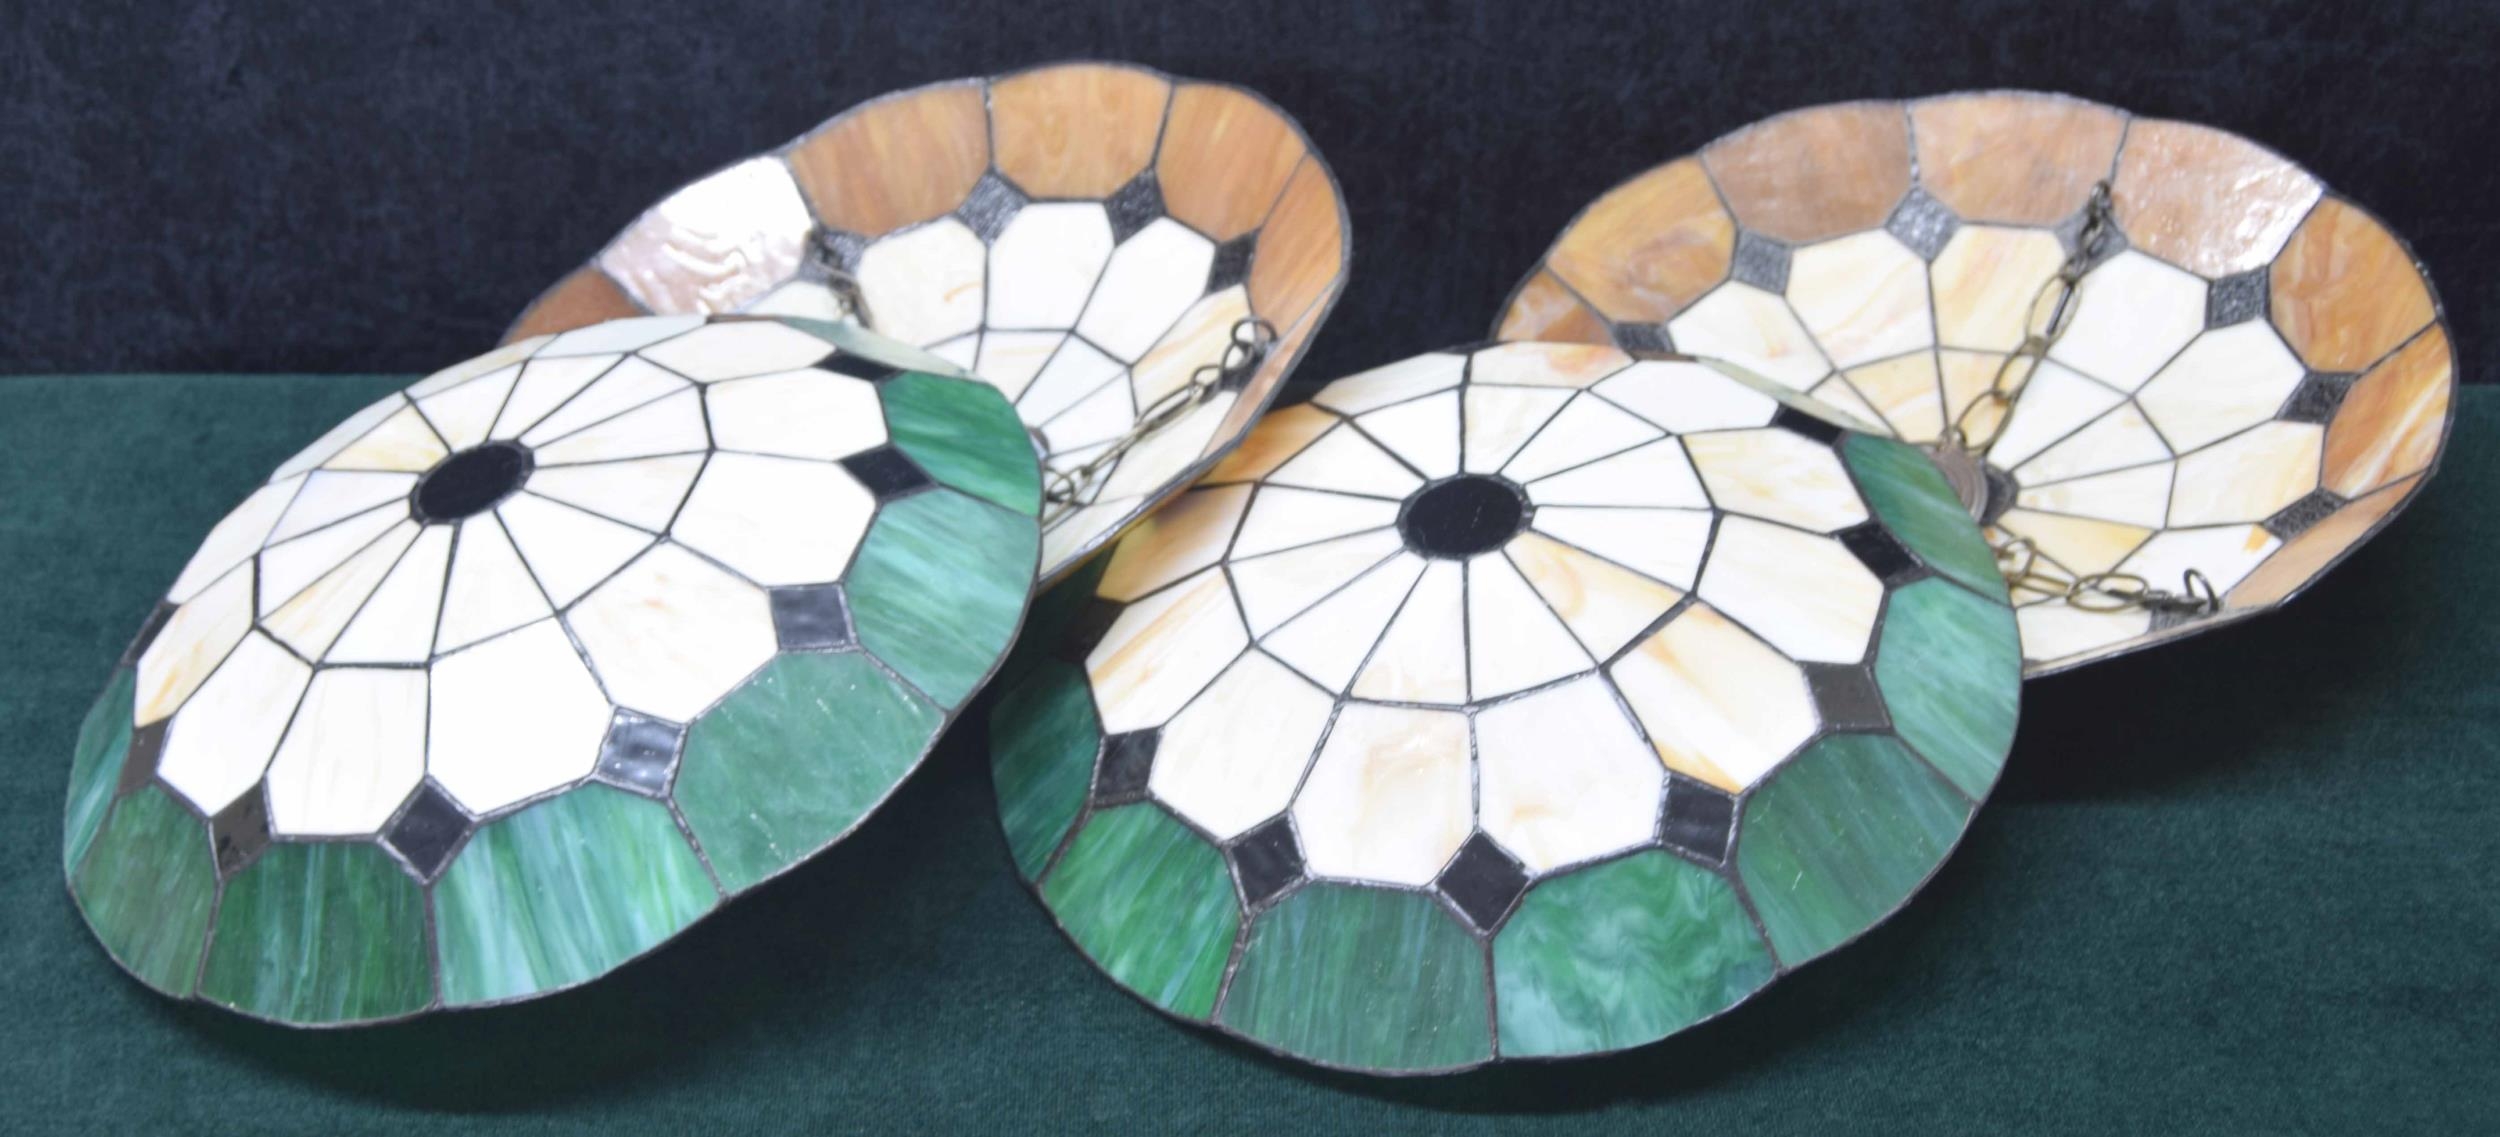 Two pairs of decorative Tiffany style glass ceiling light shades, two brown and two green, 14.5"